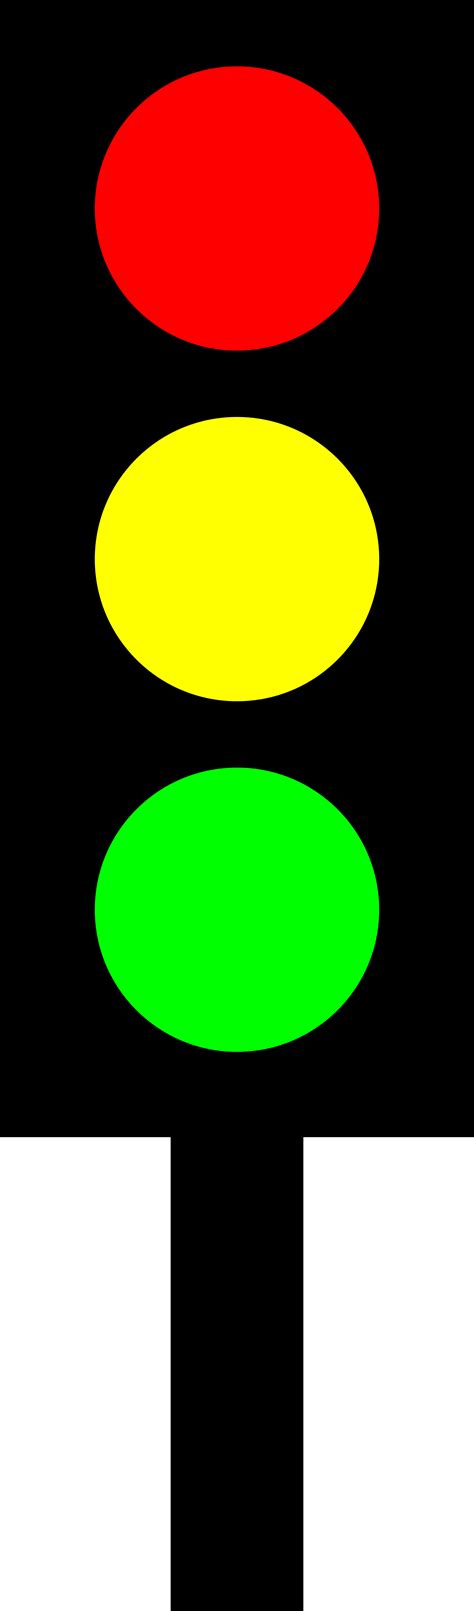 Traffic Light Icon Png 274172 Free Icons Library